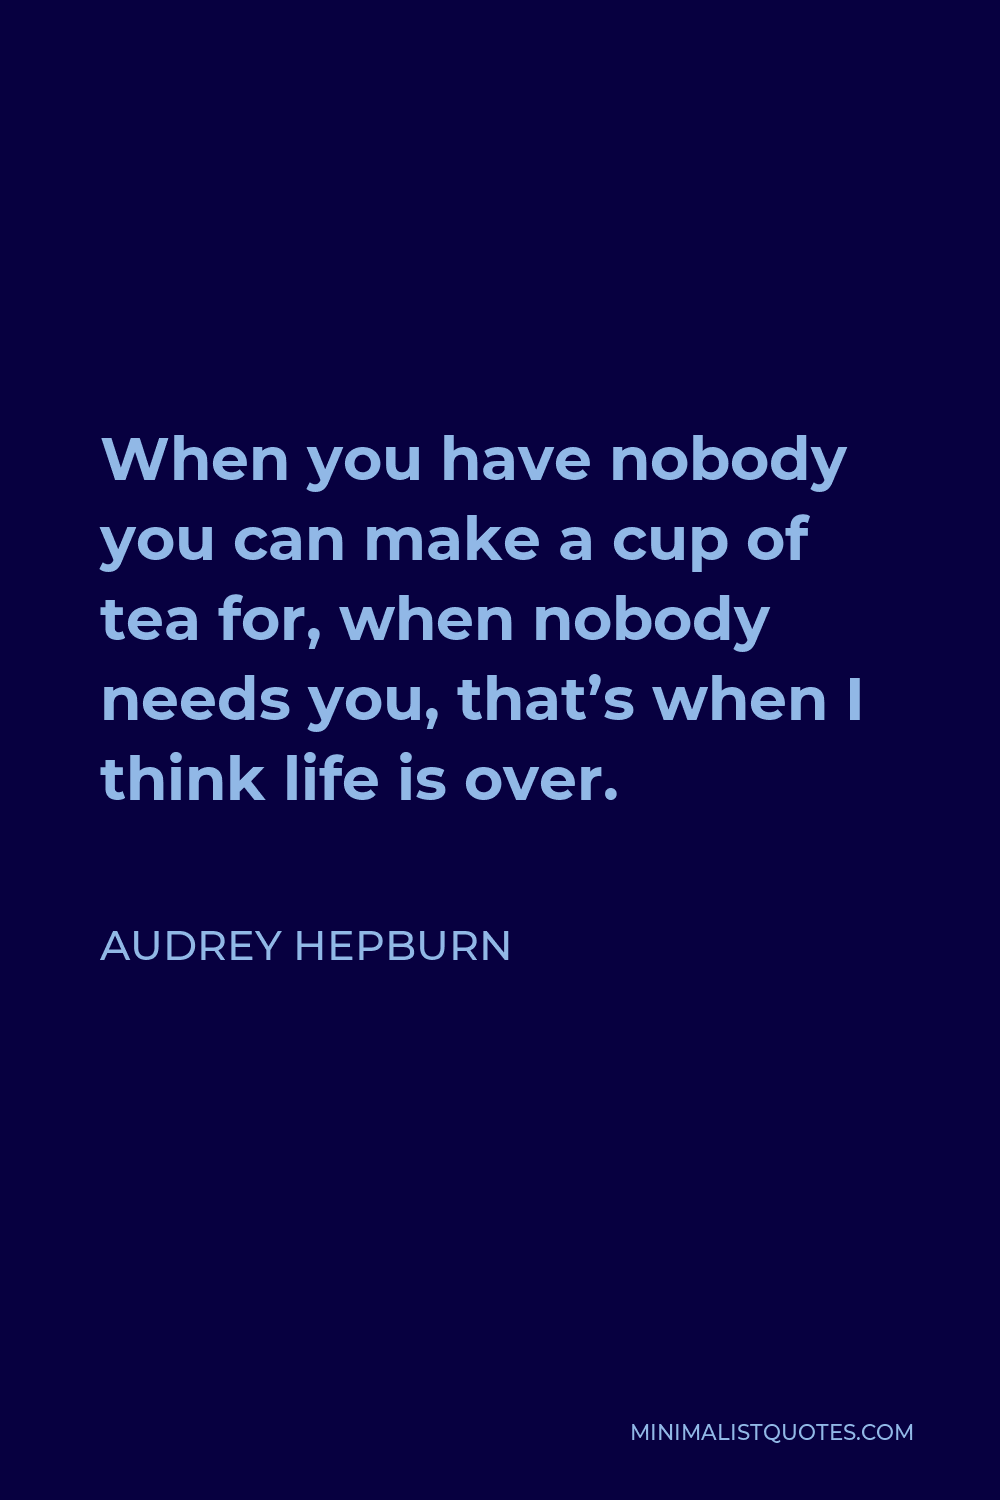 Audrey Hepburn Quote - When you have nobody you can make a cup of tea for, when nobody needs you, that’s when I think life is over.